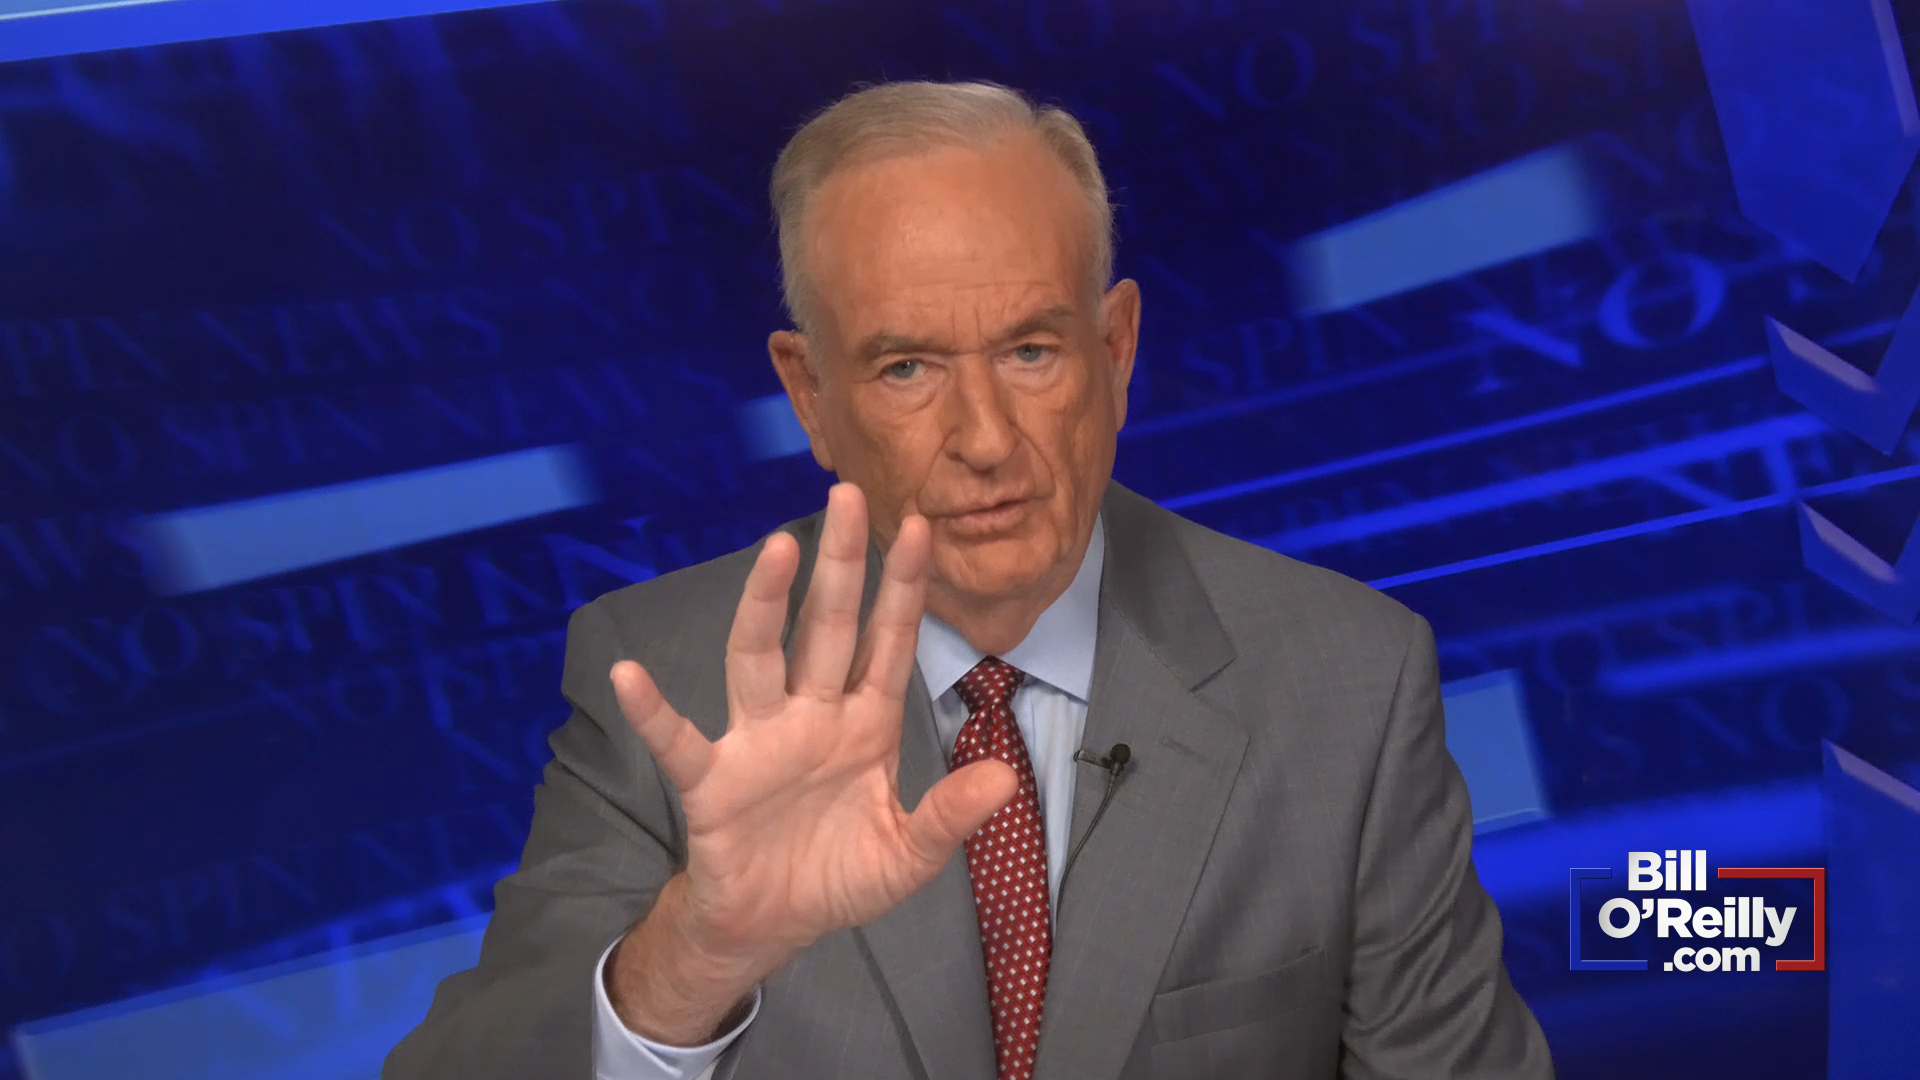 O'Reilly: Biden 'Doesn't Care' About Spending